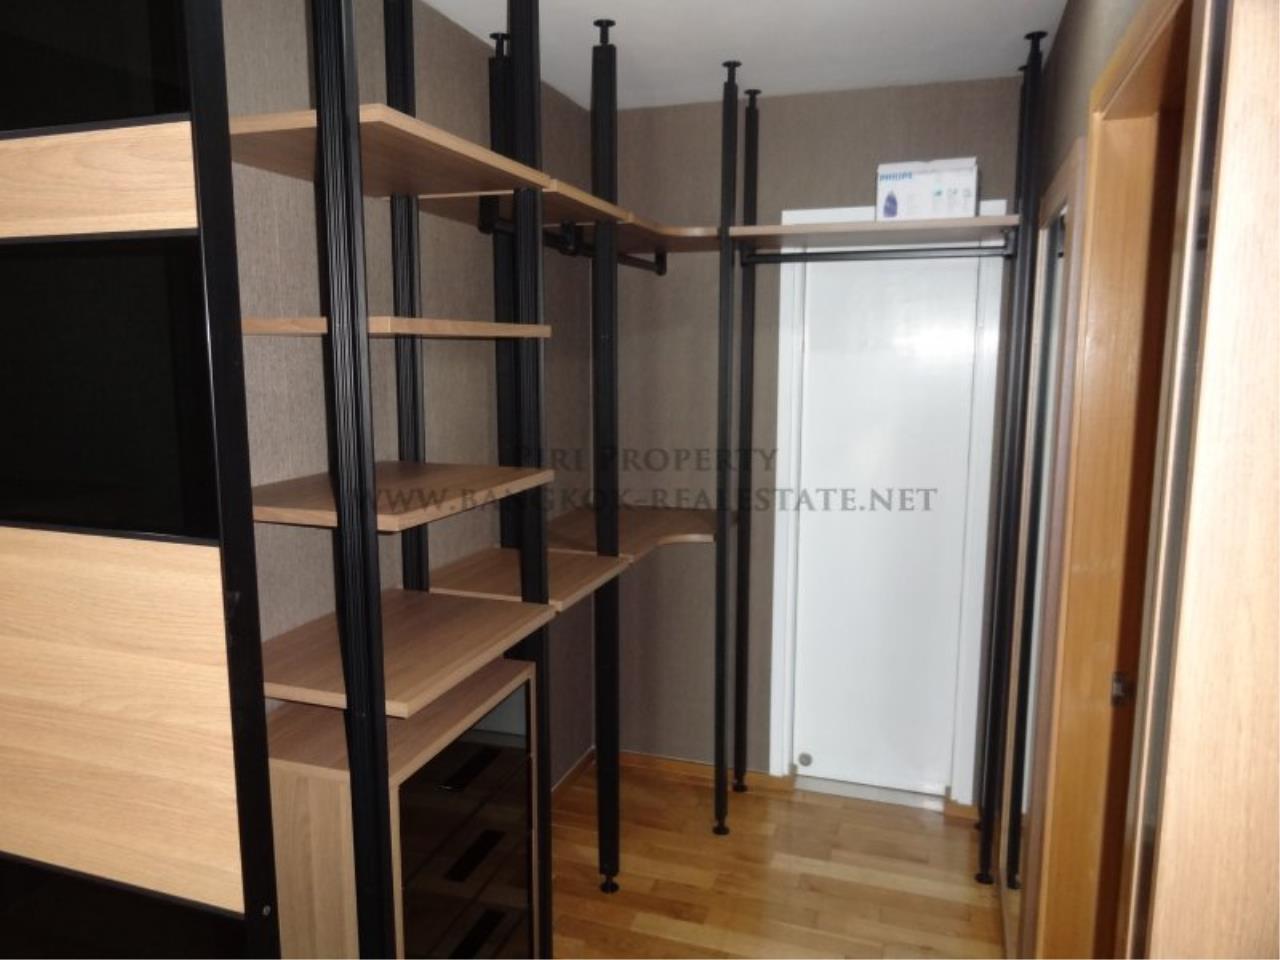 Piri Property Agency's Minimalistic Style - Emporio Duplex Condo for Rent - 1 Bedroom with nice view 2